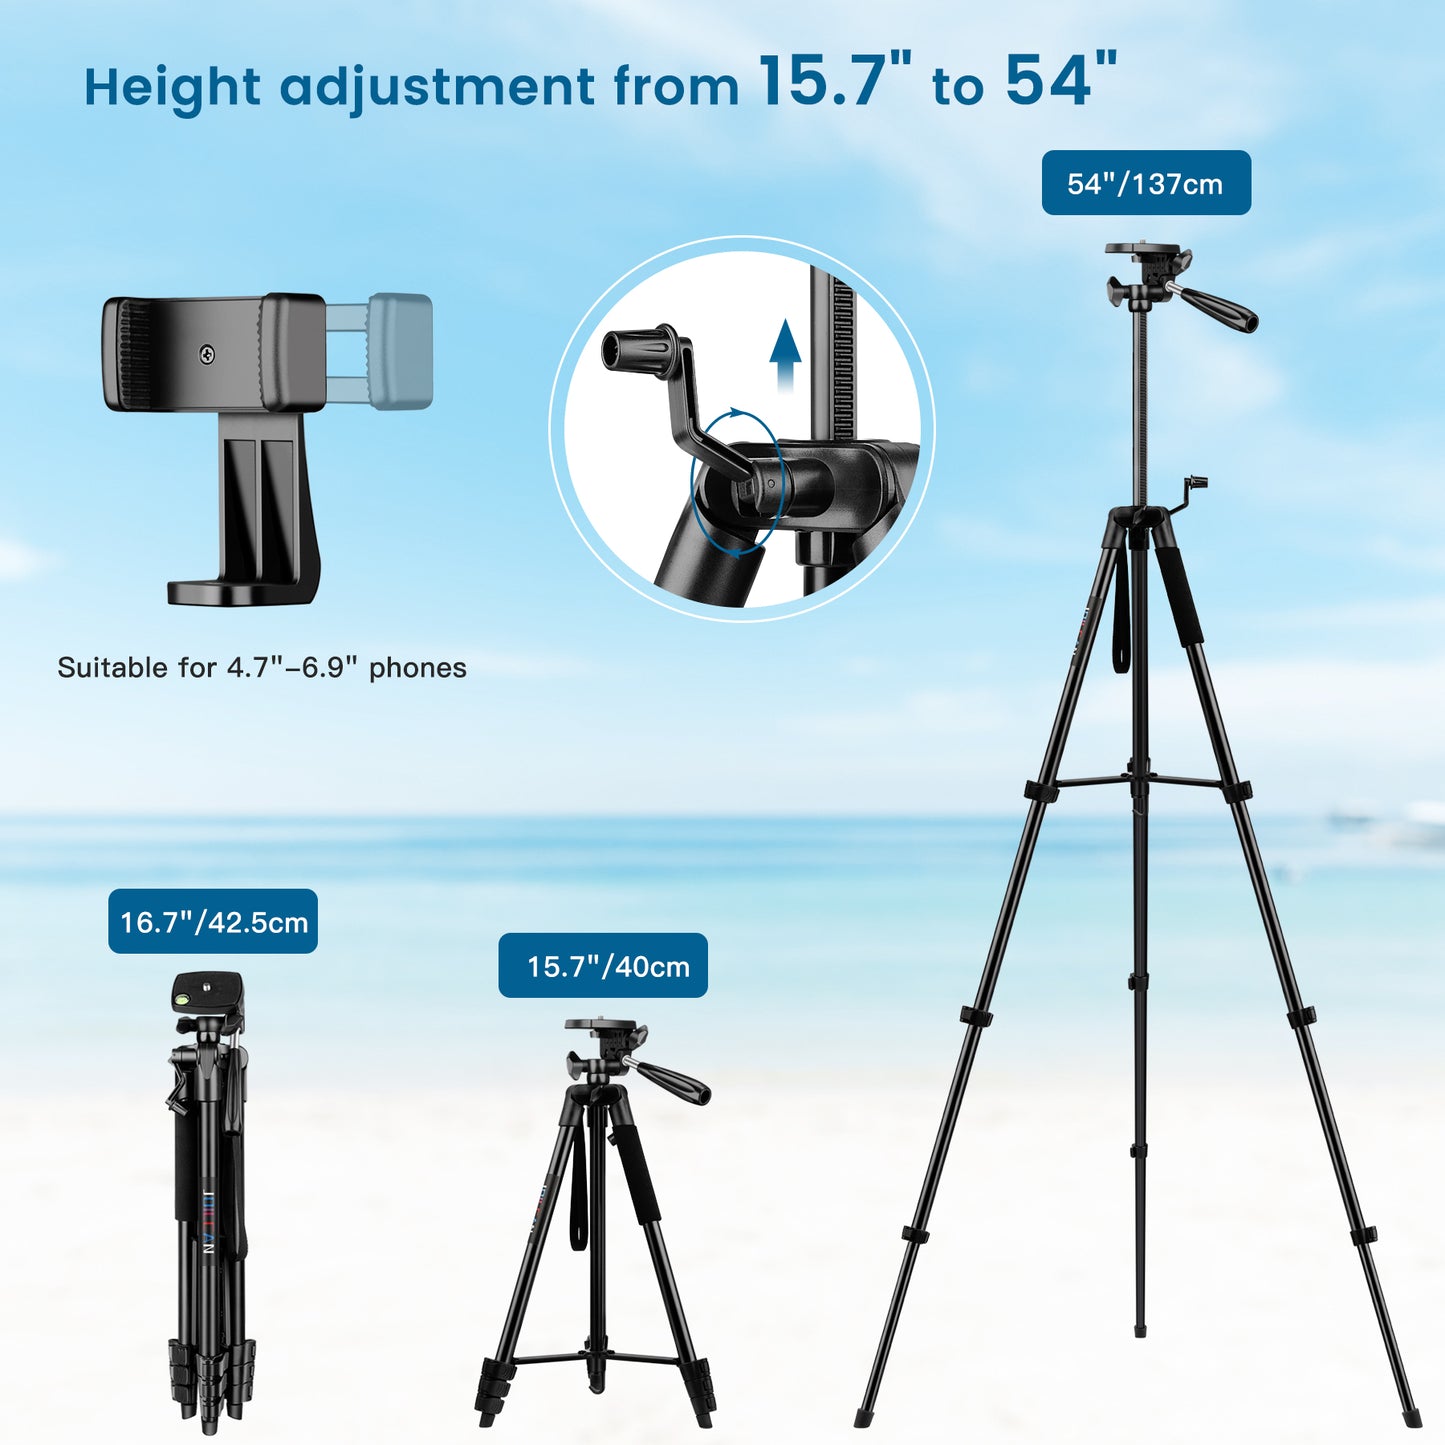 JOILCAN Phone Tripod Stand, 54" Aluminum Extendable Camera Tripod with Phone Holder & Control Remote Shutter for Android/iOS, Lightweight Portable Tripod for iPhone/Smartphone/Action Camera(EU)